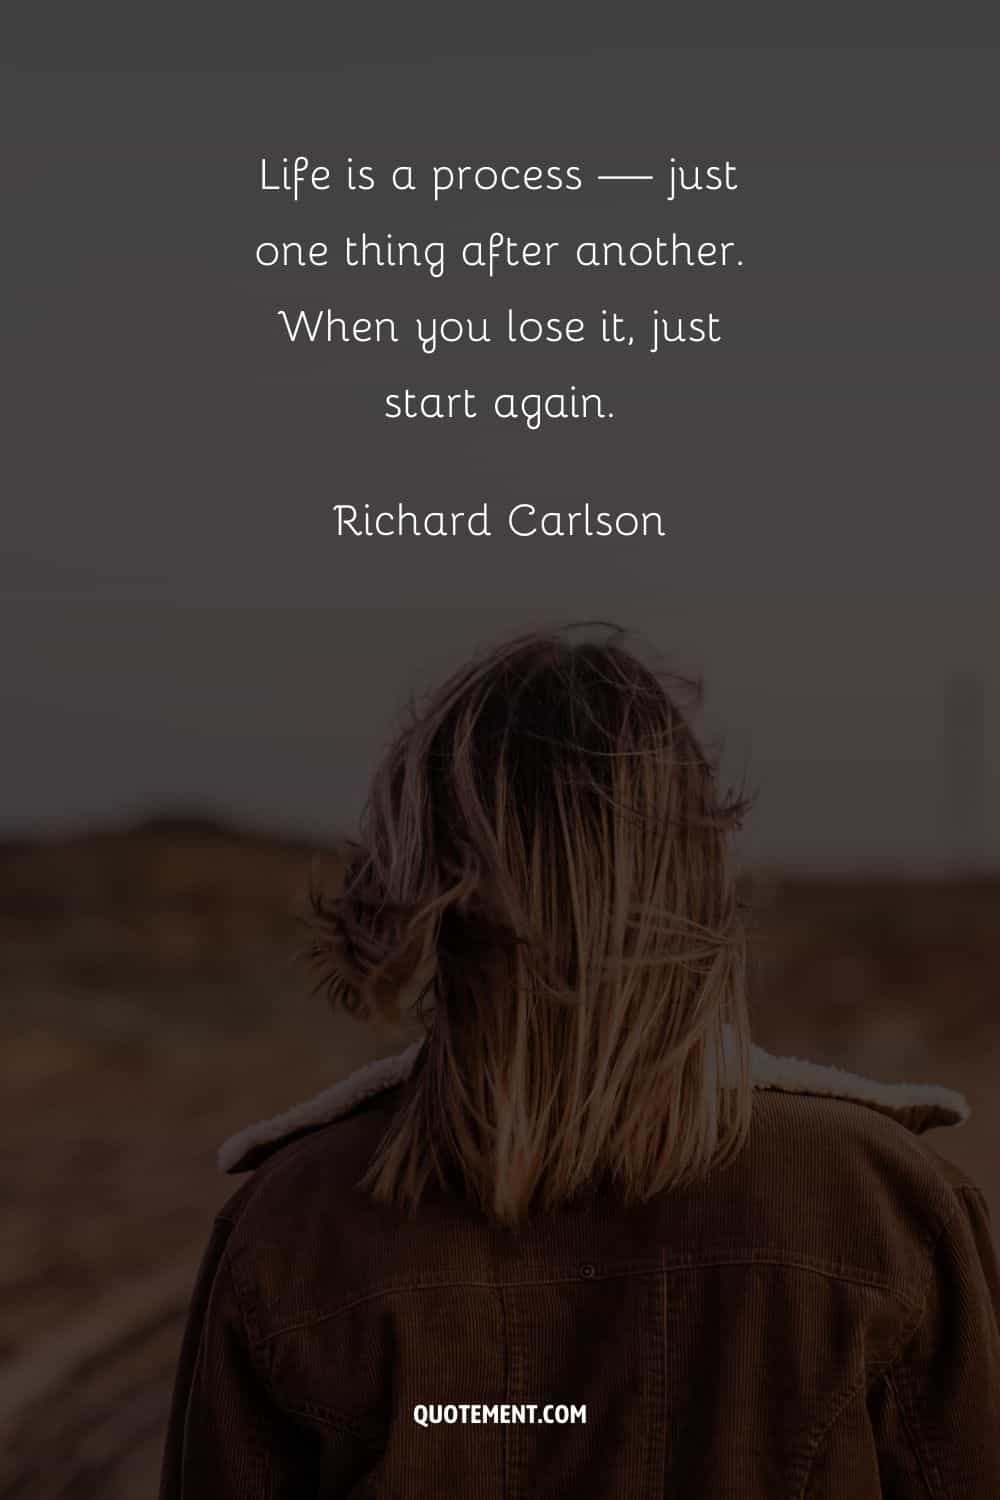 “Life is a process — just one thing after another. When you lose it, just start again.” — Richard Carlson